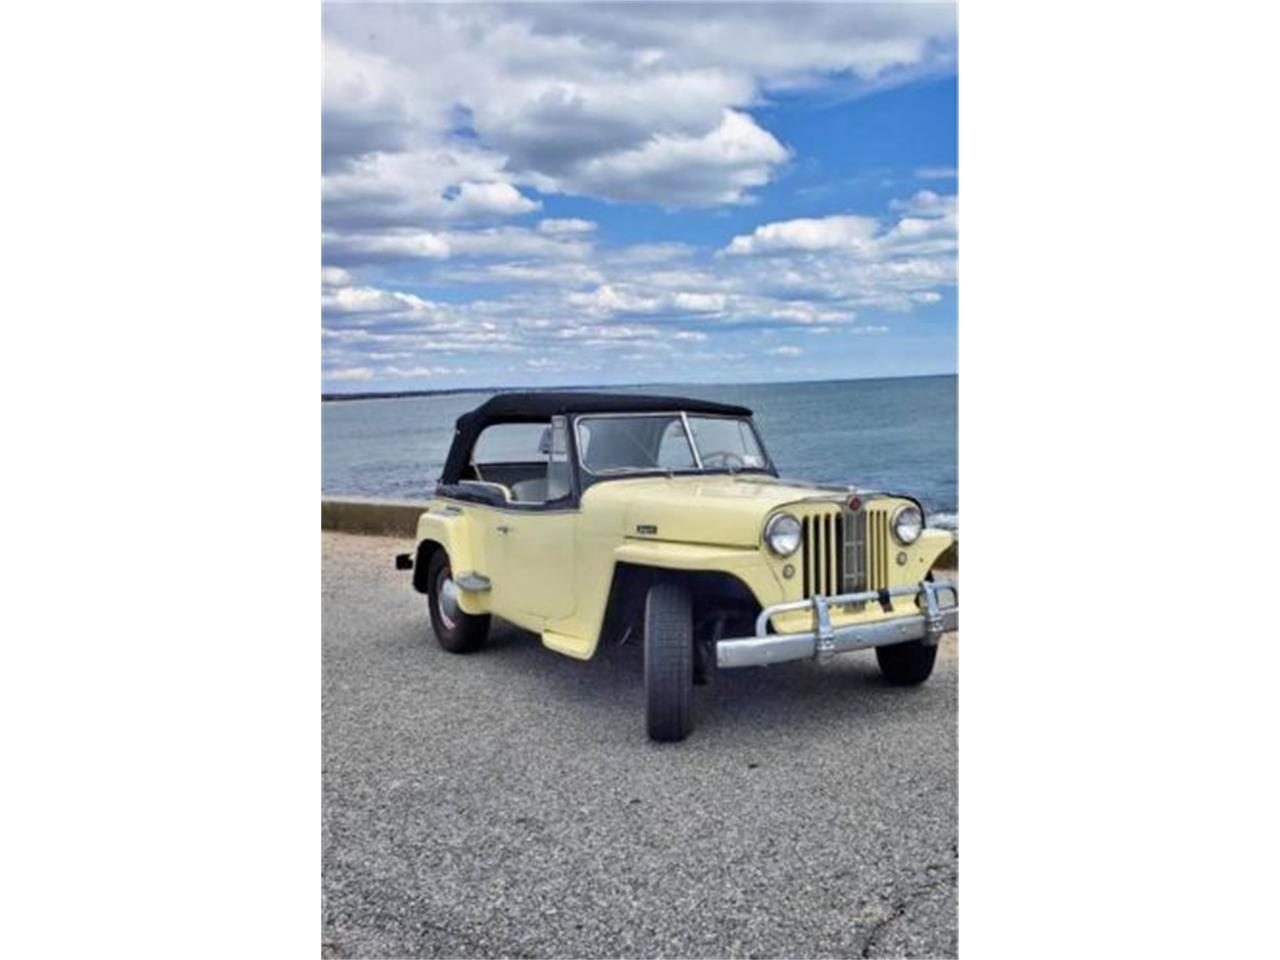 For Sale: 1948 Jeep Jeepster in Cadillac, Michigan for sale in Cadillac, MI